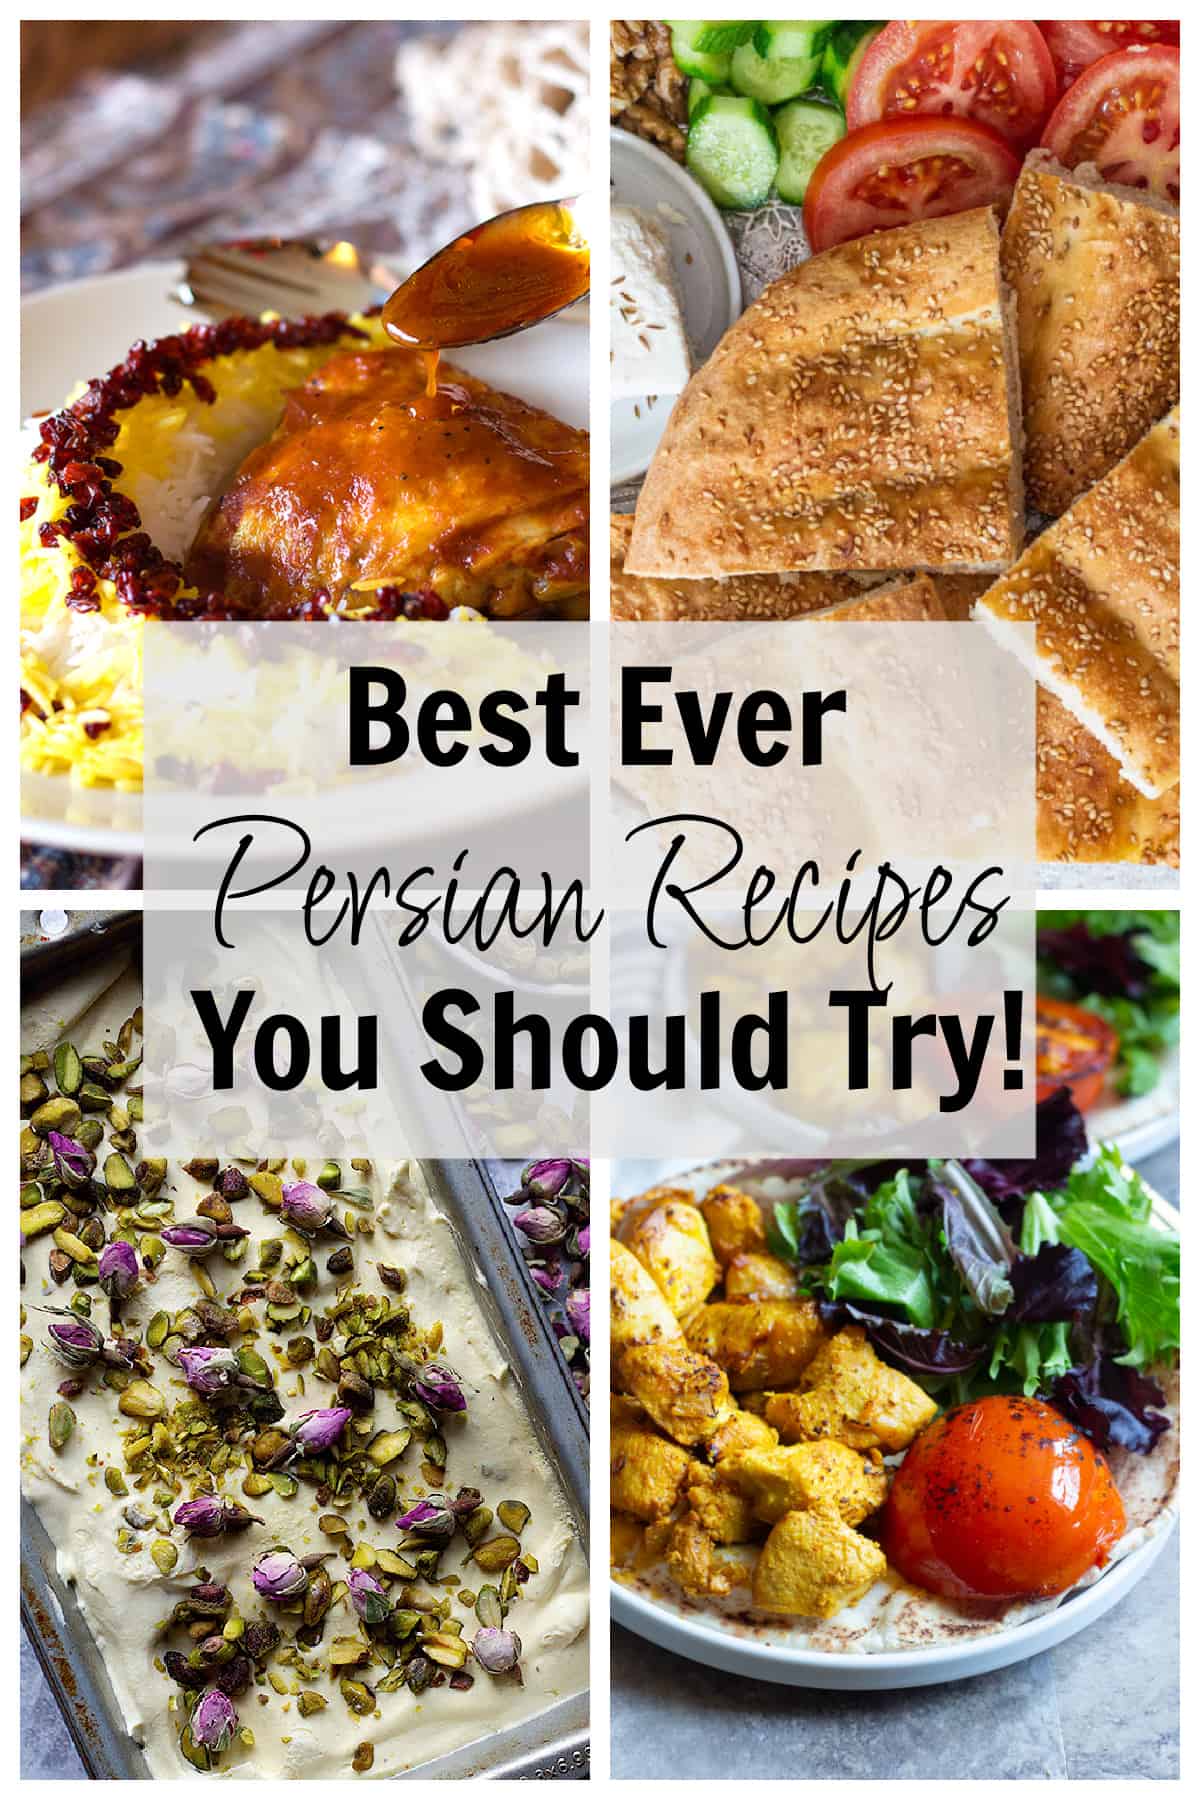 The best Persian recipes you should try! From the basics to every day dishes and desserts, you can find all classic Persian recipes here. 